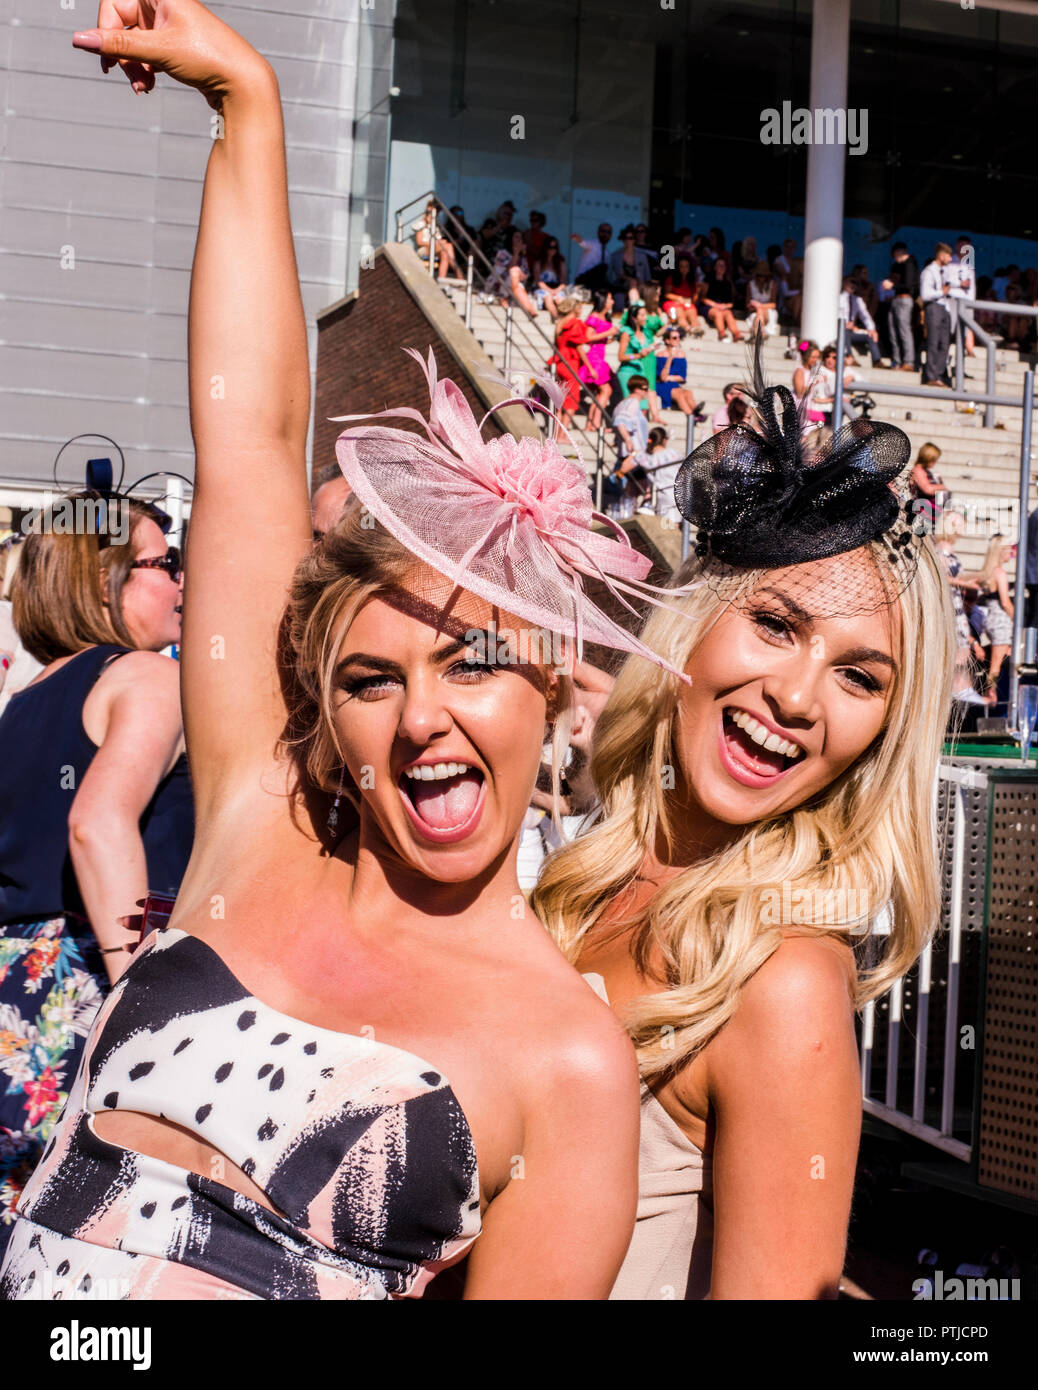 Two young ladies dancing and posing for the camera during Paloma Faith's gig at York Racecourse. Stock Photo